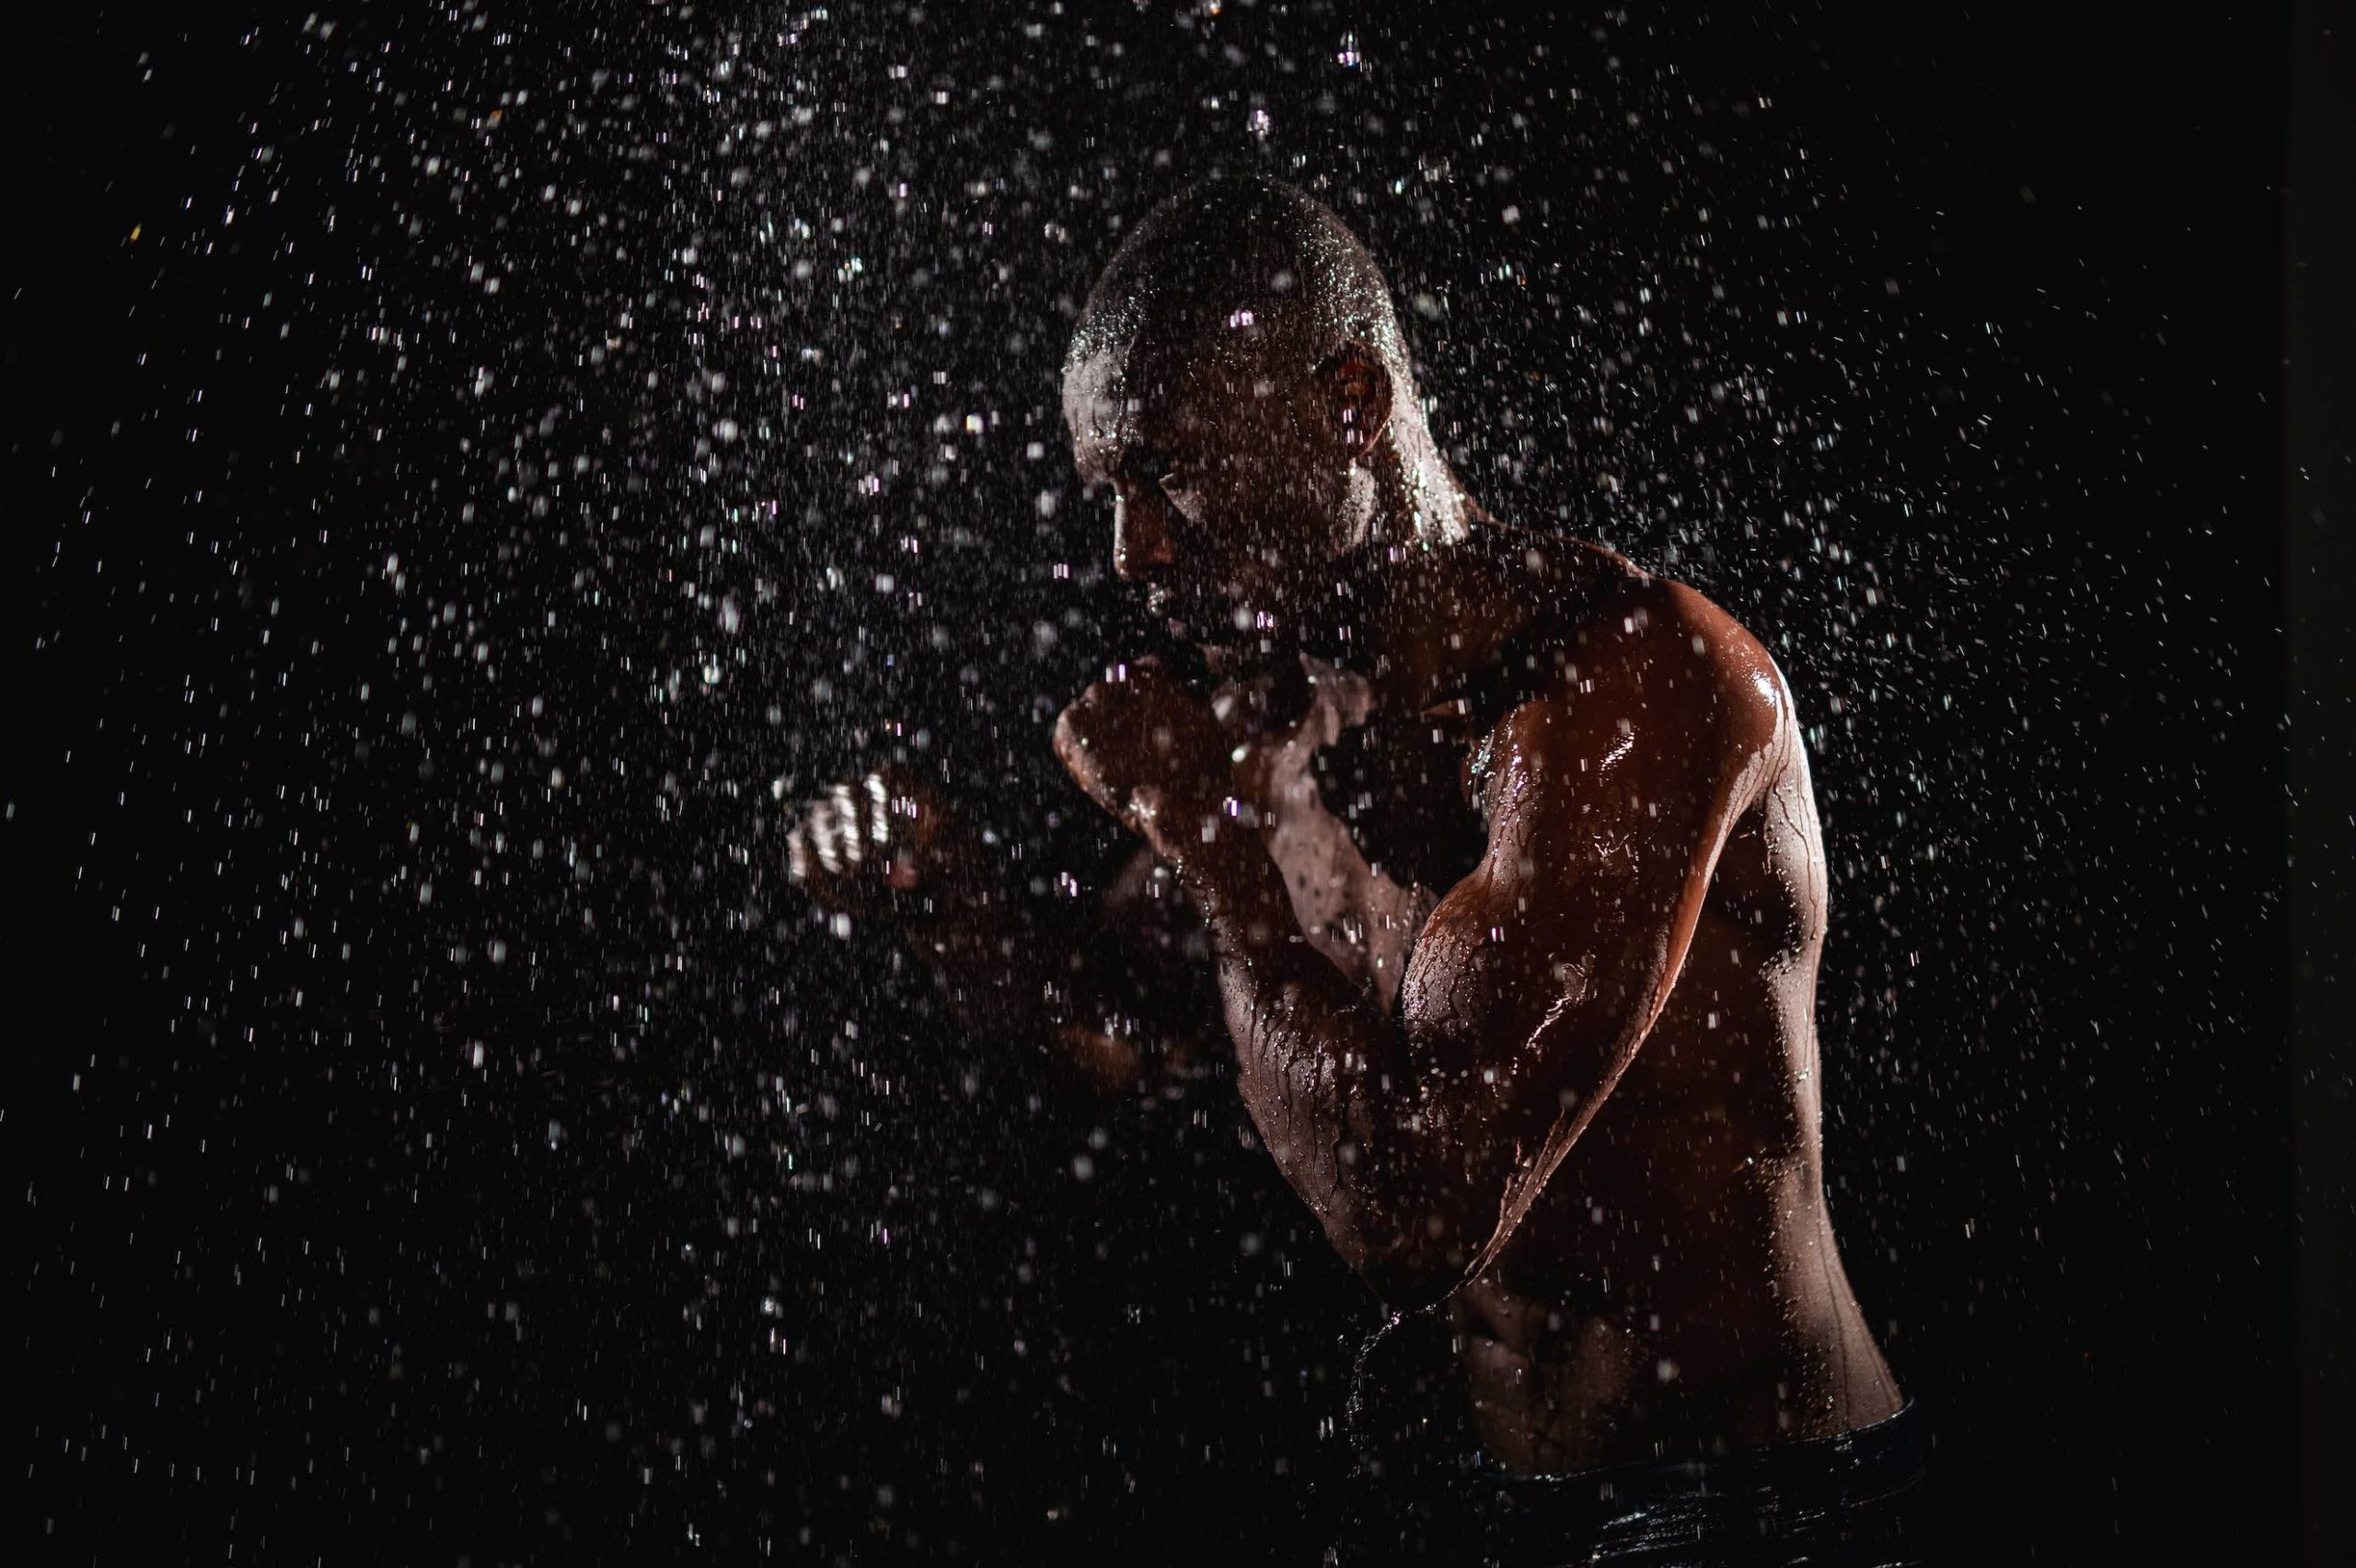 Crew Call Rain and Water Side profile of a muscular man in a boxing pose in a shower of water